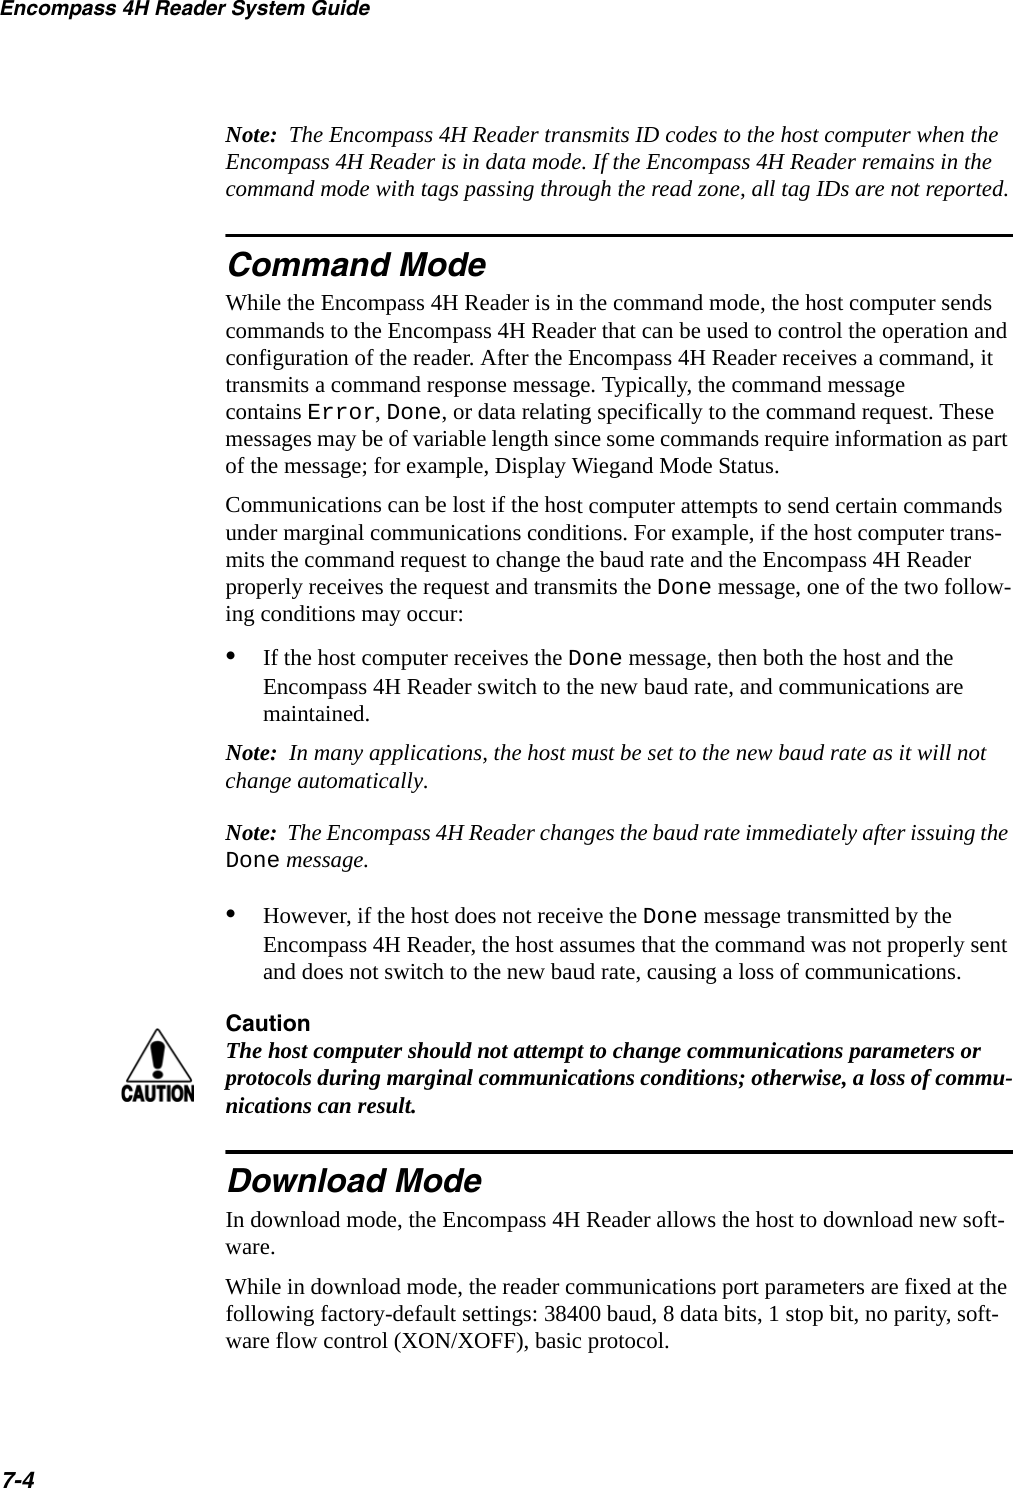 Encompass 4H Reader System Guide7-4Note:  The Encompass 4H Reader transmits ID codes to the host computer when the Encompass 4H Reader is in data mode. If the Encompass 4H Reader remains in the command mode with tags passing through the read zone, all tag IDs are not reported.Command ModeWhile the Encompass 4H Reader is in the command mode, the host computer sends commands to the Encompass 4H Reader that can be used to control the operation and configuration of the reader. After the Encompass 4H Reader receives a command, it transmits a command response message. Typically, the command message contains Error, Done, or data relating specifically to the command request. These messages may be of variable length since some commands require information as part of the message; for example, Display Wiegand Mode Status. Communications can be lost if the host computer attempts to send certain commands under marginal communications conditions. For example, if the host computer trans-mits the command request to change the baud rate and the Encompass 4H Reader properly receives the request and transmits the Done message, one of the two follow-ing conditions may occur:•If the host computer receives the Done message, then both the host and the Encompass 4H Reader switch to the new baud rate, and communications are maintained. Note:  In many applications, the host must be set to the new baud rate as it will not change automatically.Note:  The Encompass 4H Reader changes the baud rate immediately after issuing the Done message.•However, if the host does not receive the Done message transmitted by the Encompass 4H Reader, the host assumes that the command was not properly sent and does not switch to the new baud rate, causing a loss of communications. CautionThe host computer should not attempt to change communications parameters or protocols during marginal communications conditions; otherwise, a loss of commu-nications can result.Download ModeIn download mode, the Encompass 4H Reader allows the host to download new soft-ware.While in download mode, the reader communications port parameters are fixed at the following factory-default settings: 38400 baud, 8 data bits, 1 stop bit, no parity, soft-ware flow control (XON/XOFF), basic protocol.